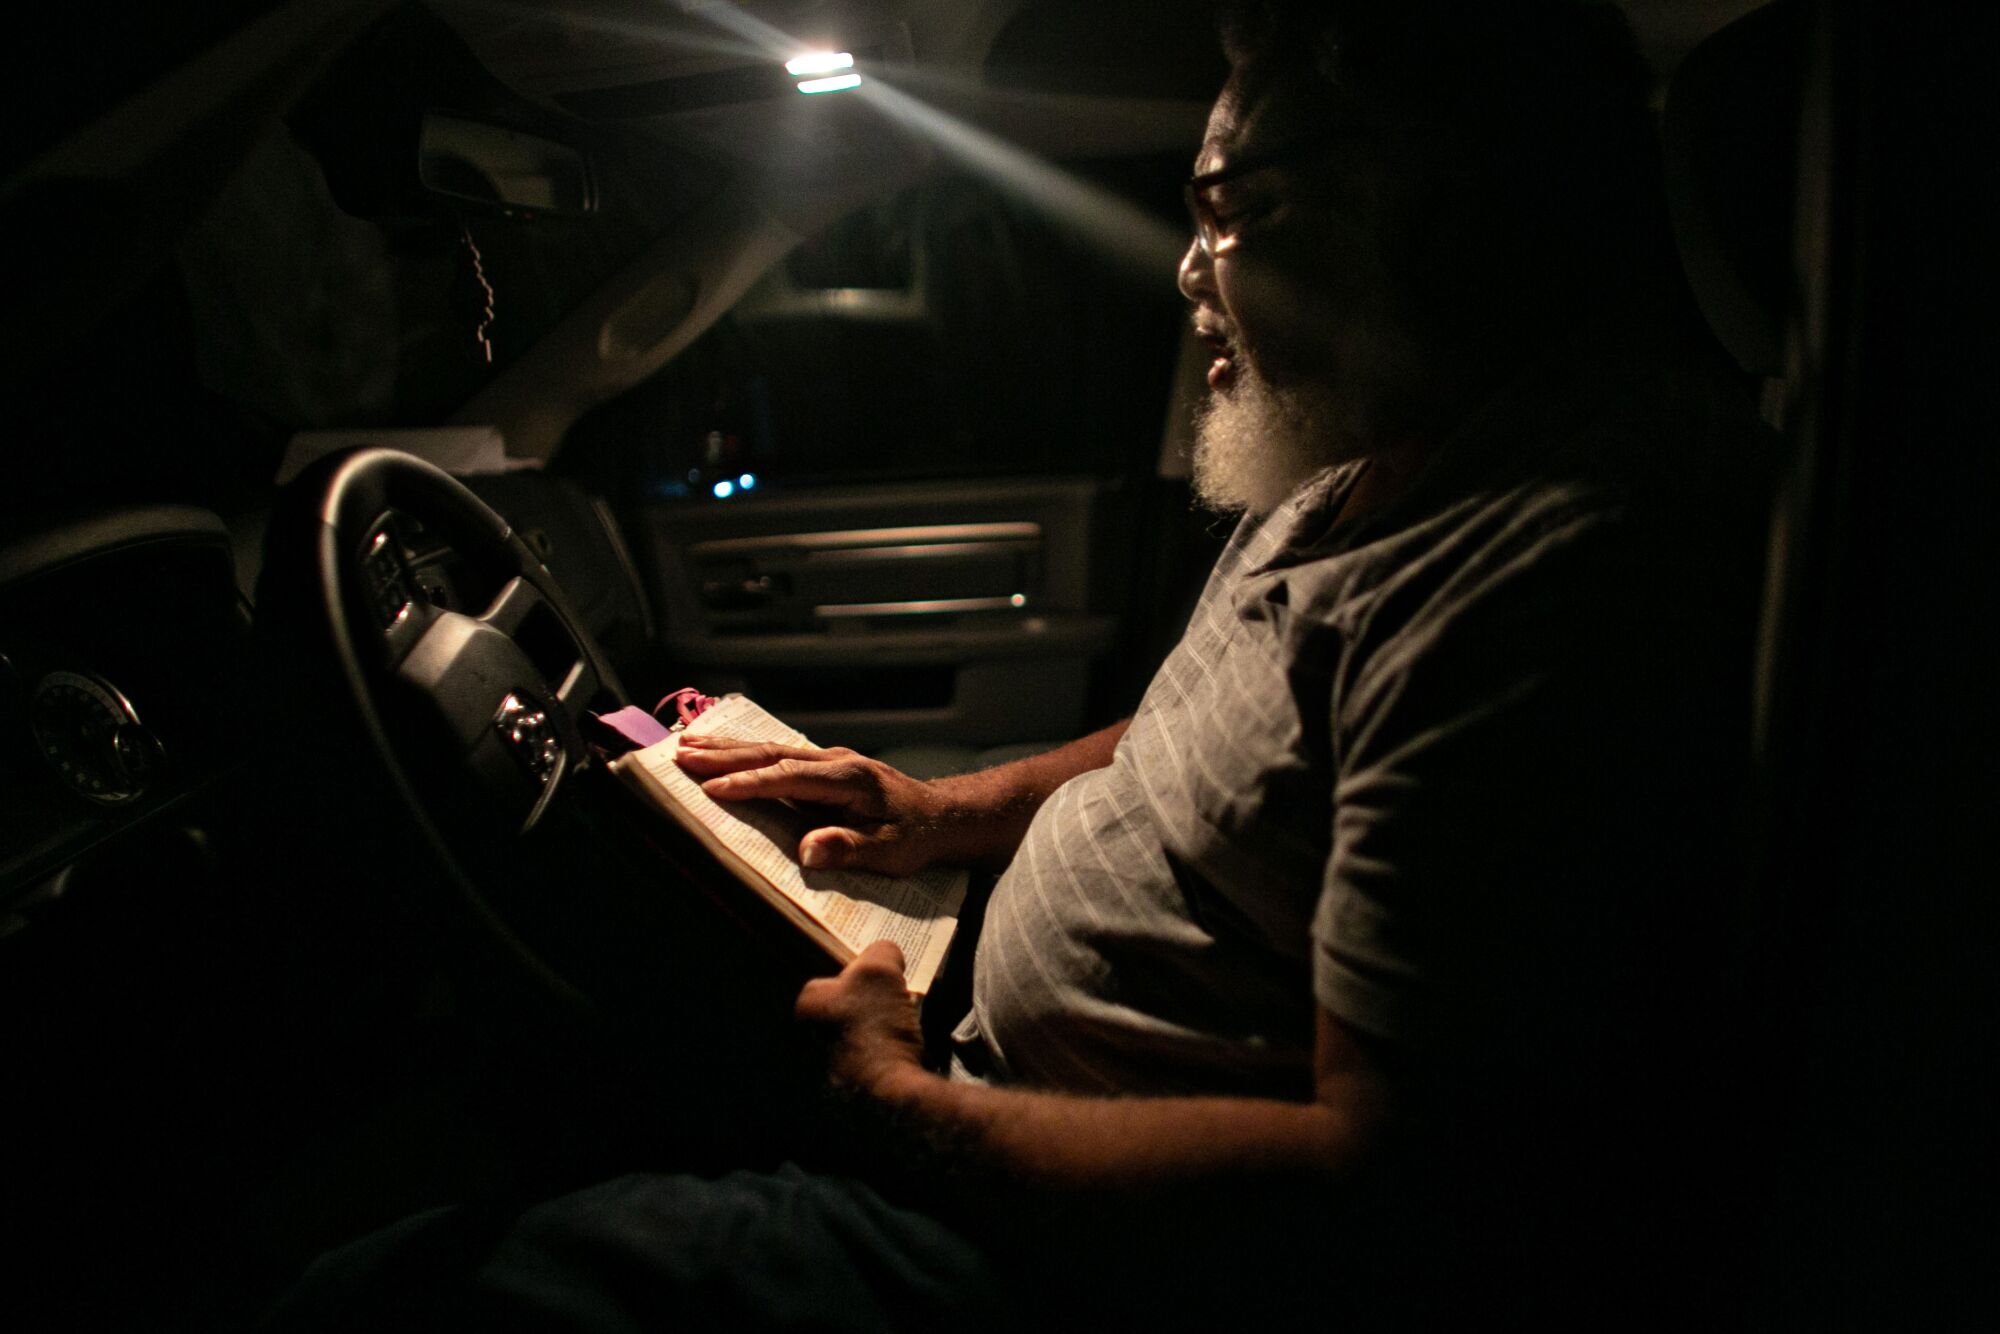 Pastor Albert Mann of Gordon Chapel Community Church starts his Sundays by praying and reading the Bible in his truck.